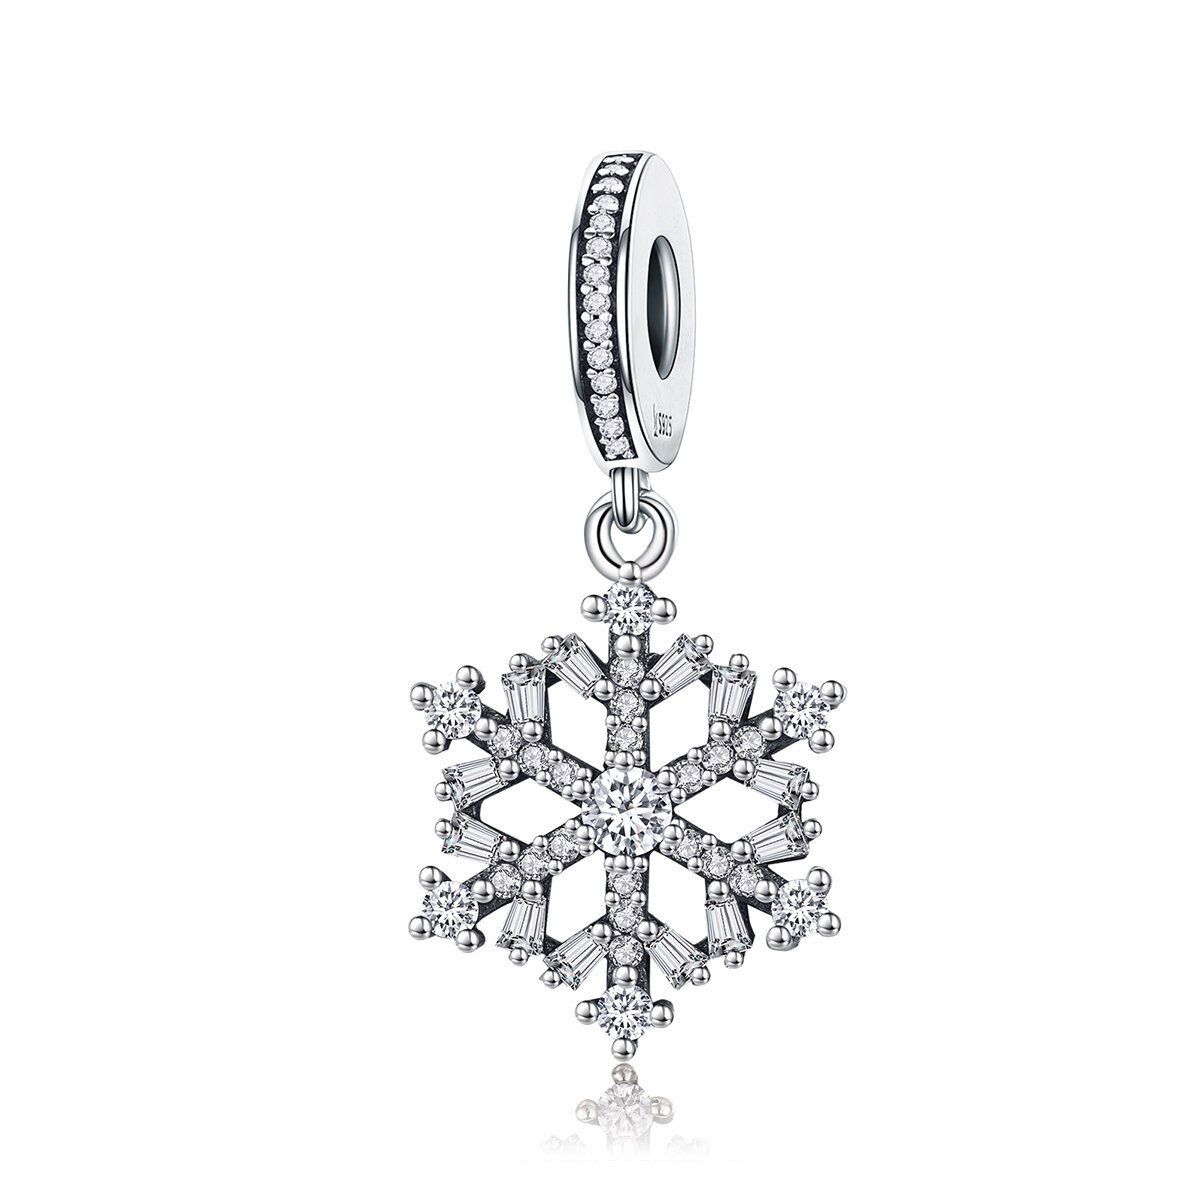 GemKing SCC266 Glittering and Translucent Snowflake S925 Sterling Silver Charm